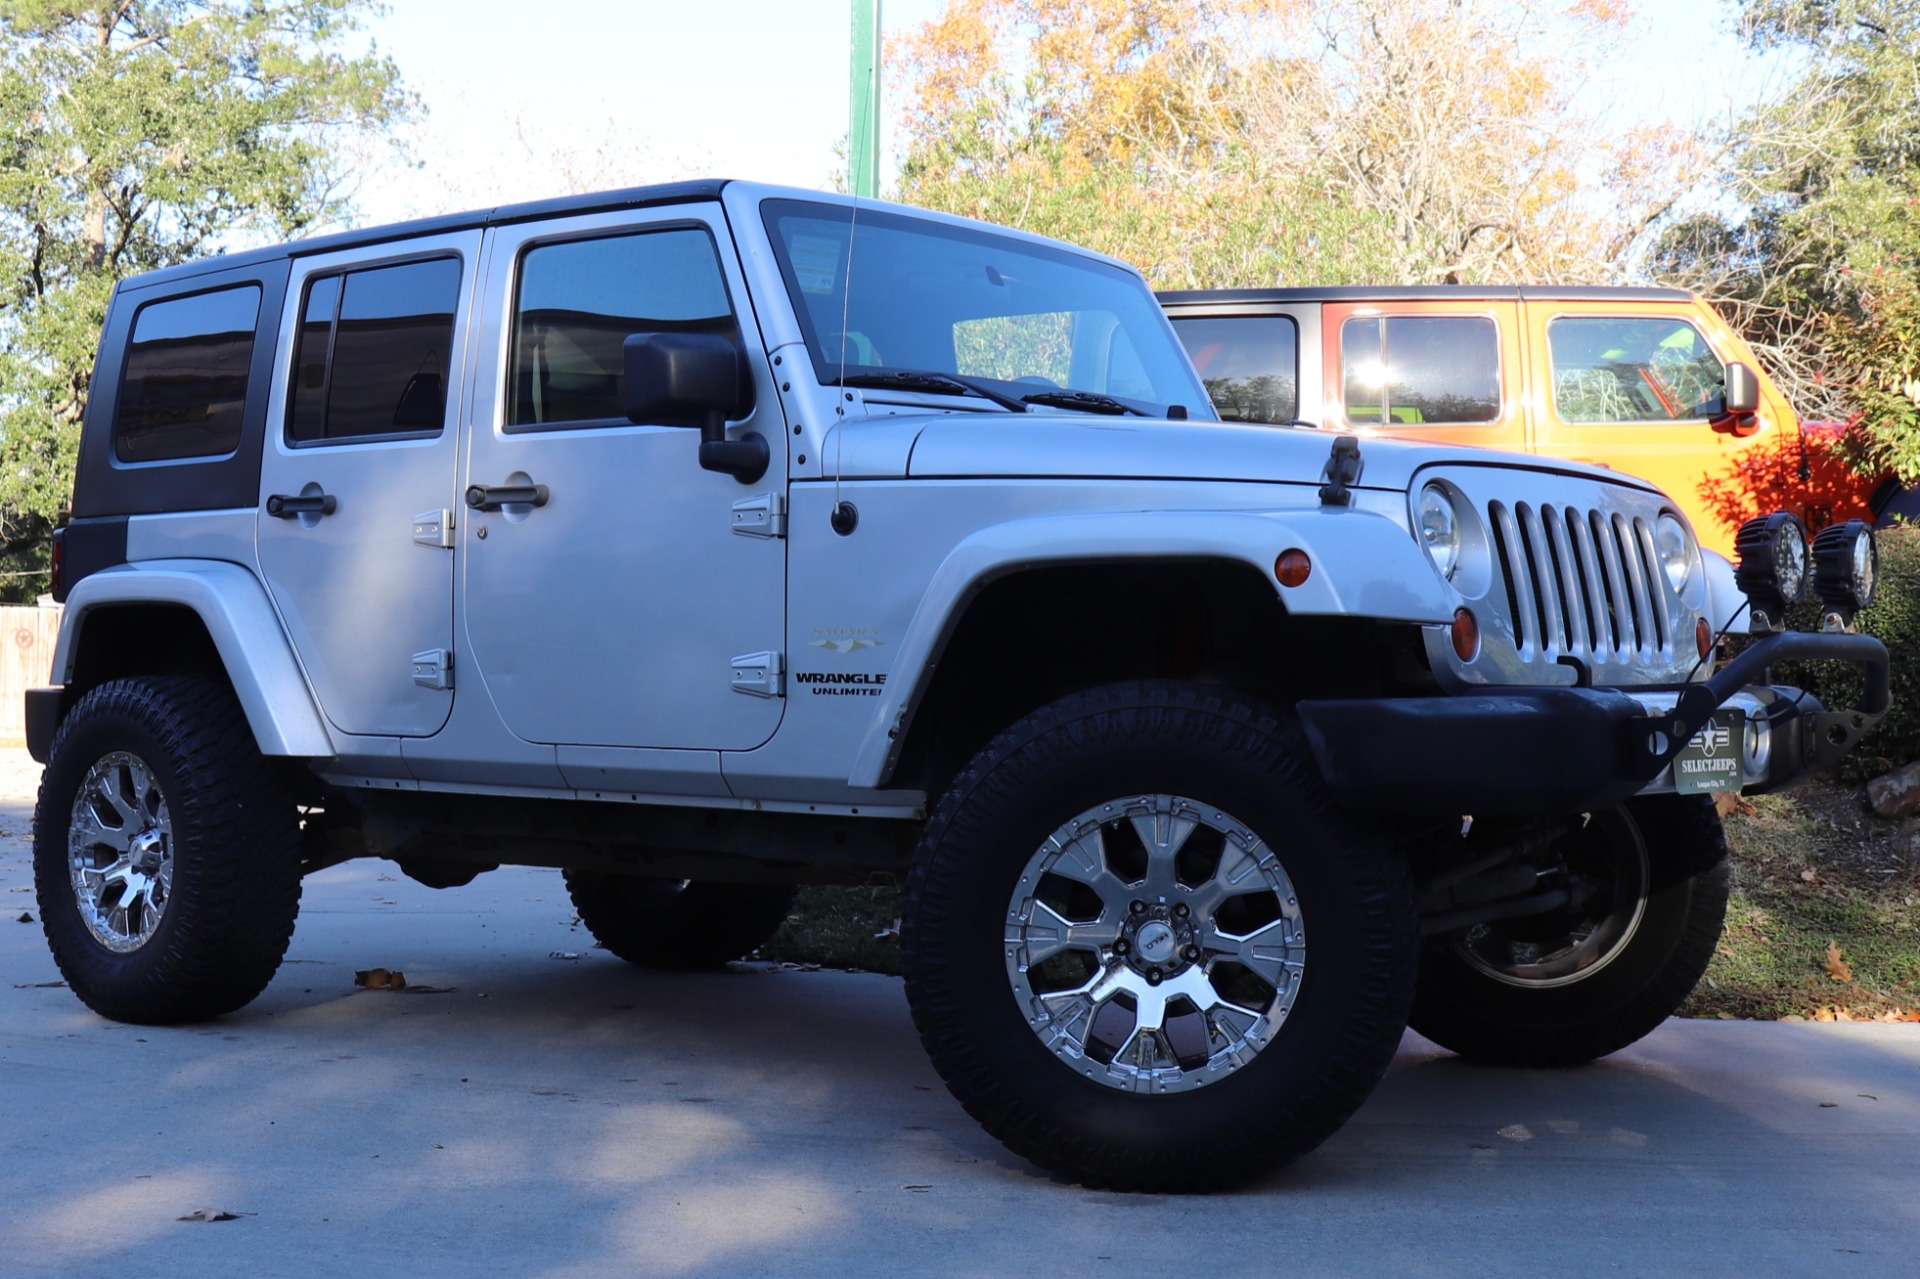 Used 2008 Jeep Wrangler Unlimited Sahara For Sale ($16,995) | Select Jeeps  Inc. Stock #533857